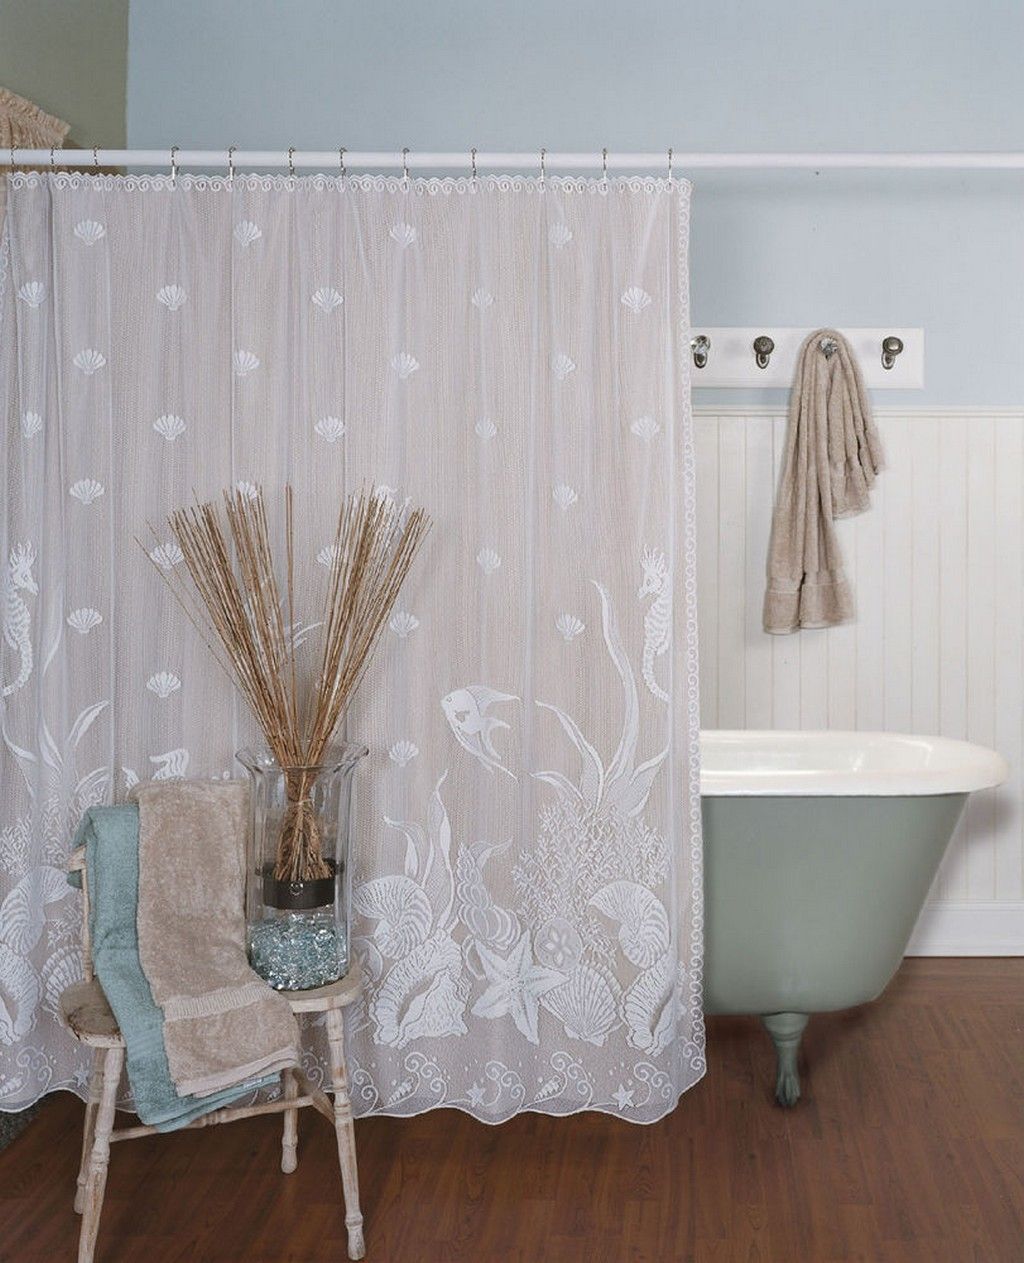 Bed Bath Inspiring Bathroom Decor With Clawfoot Tub Shower For Claw Tub Shower Curtains (View 5 of 25)